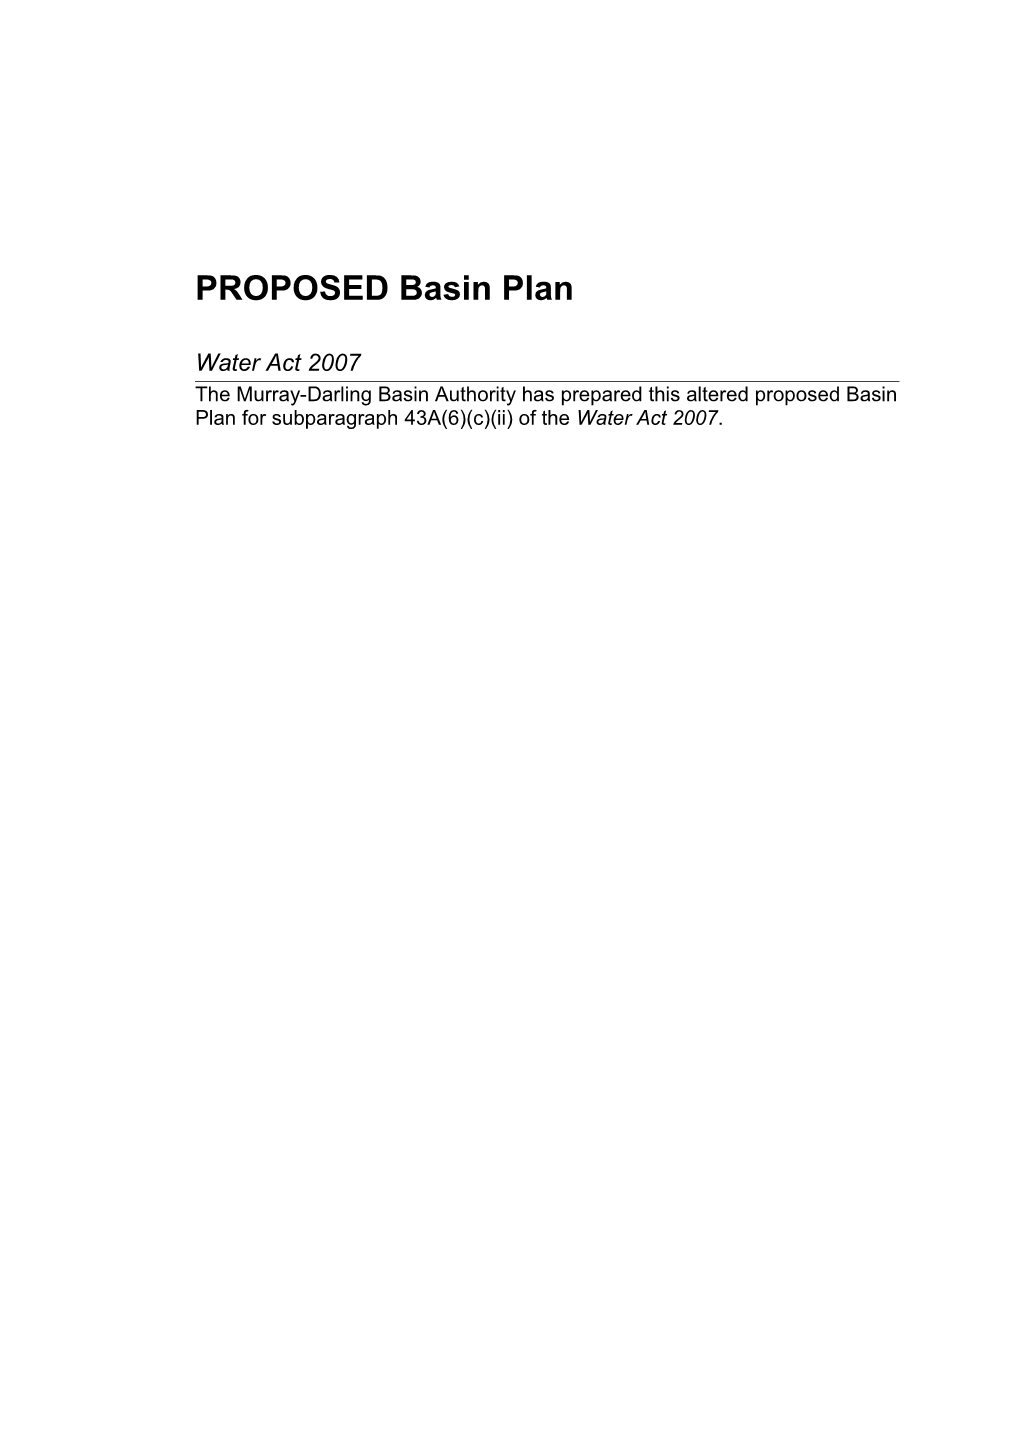 Proposed Basin Plan, August 2012